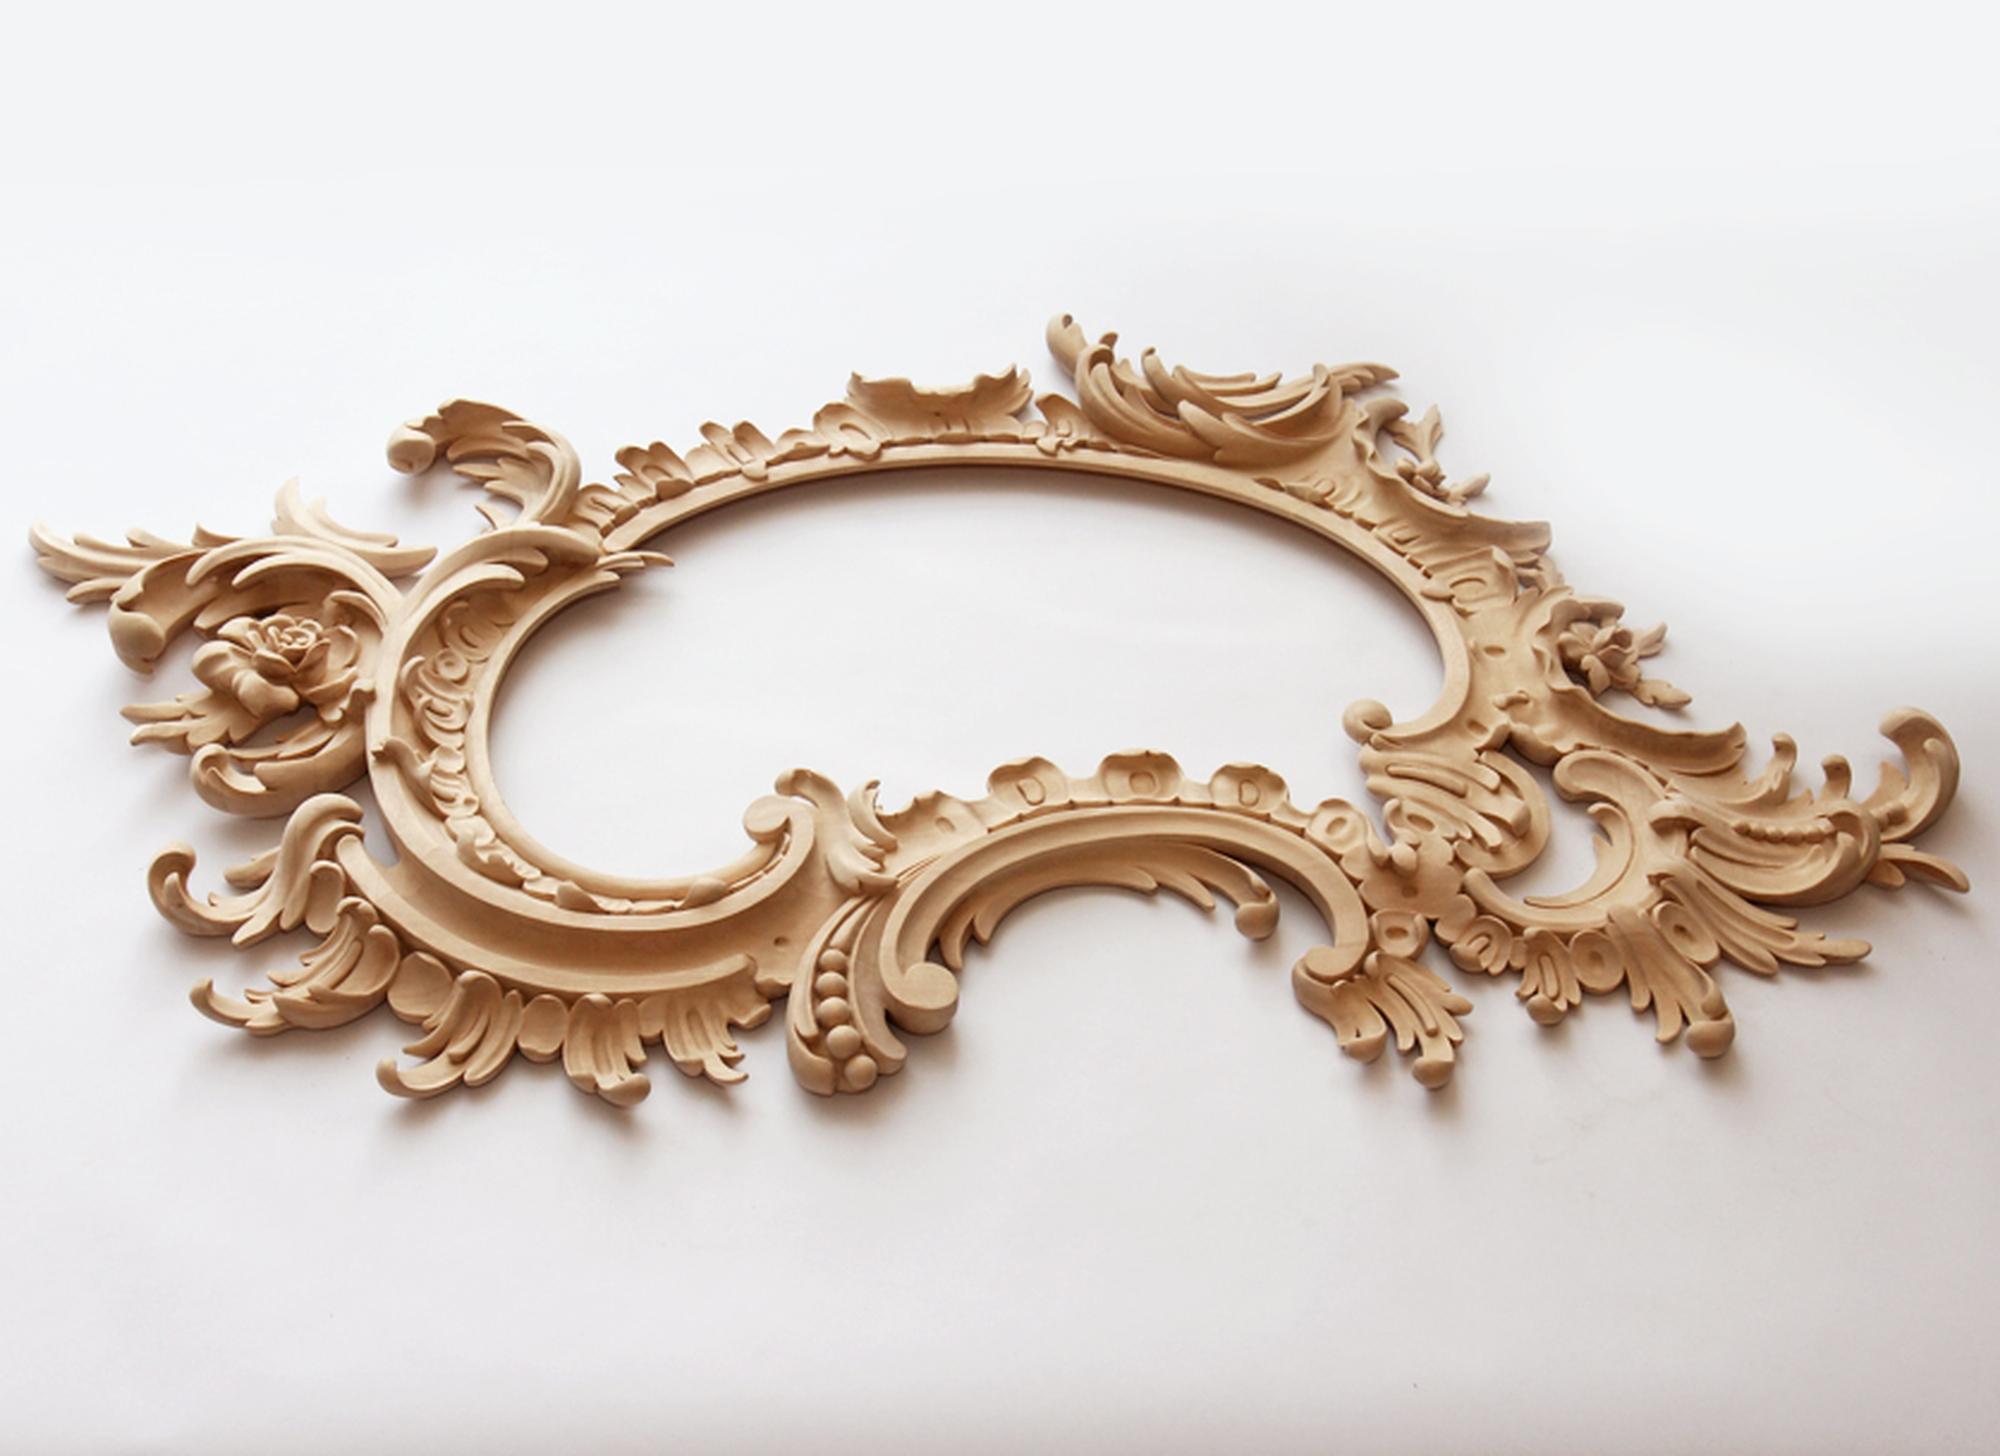 Unfinished high quality wood carving mirror frame from oak or beech of your choice.

>> SKU: RM-016

>> Dimensions (A x B x C):

- 43,82